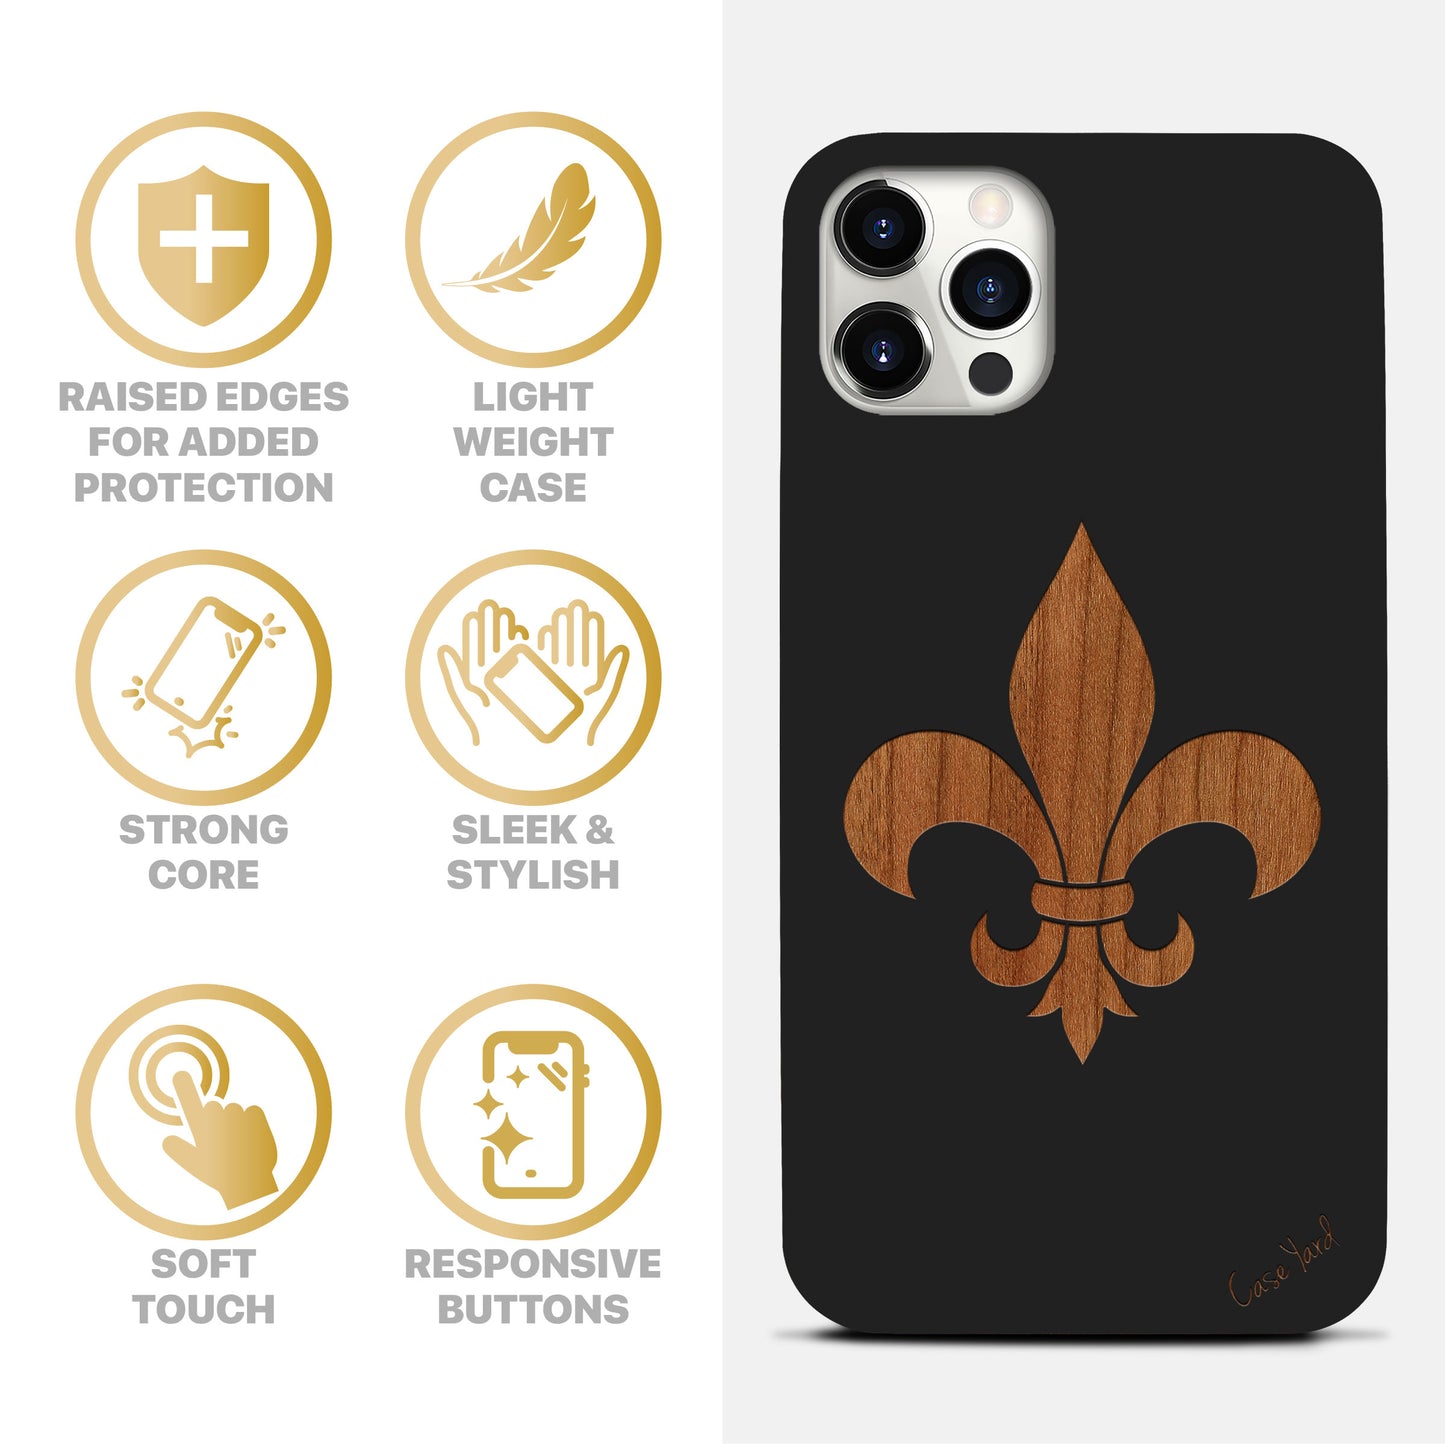 Wooden Cell Phone Case Cover, Laser Engraved case for iPhone & Samsung phone French Tip Design